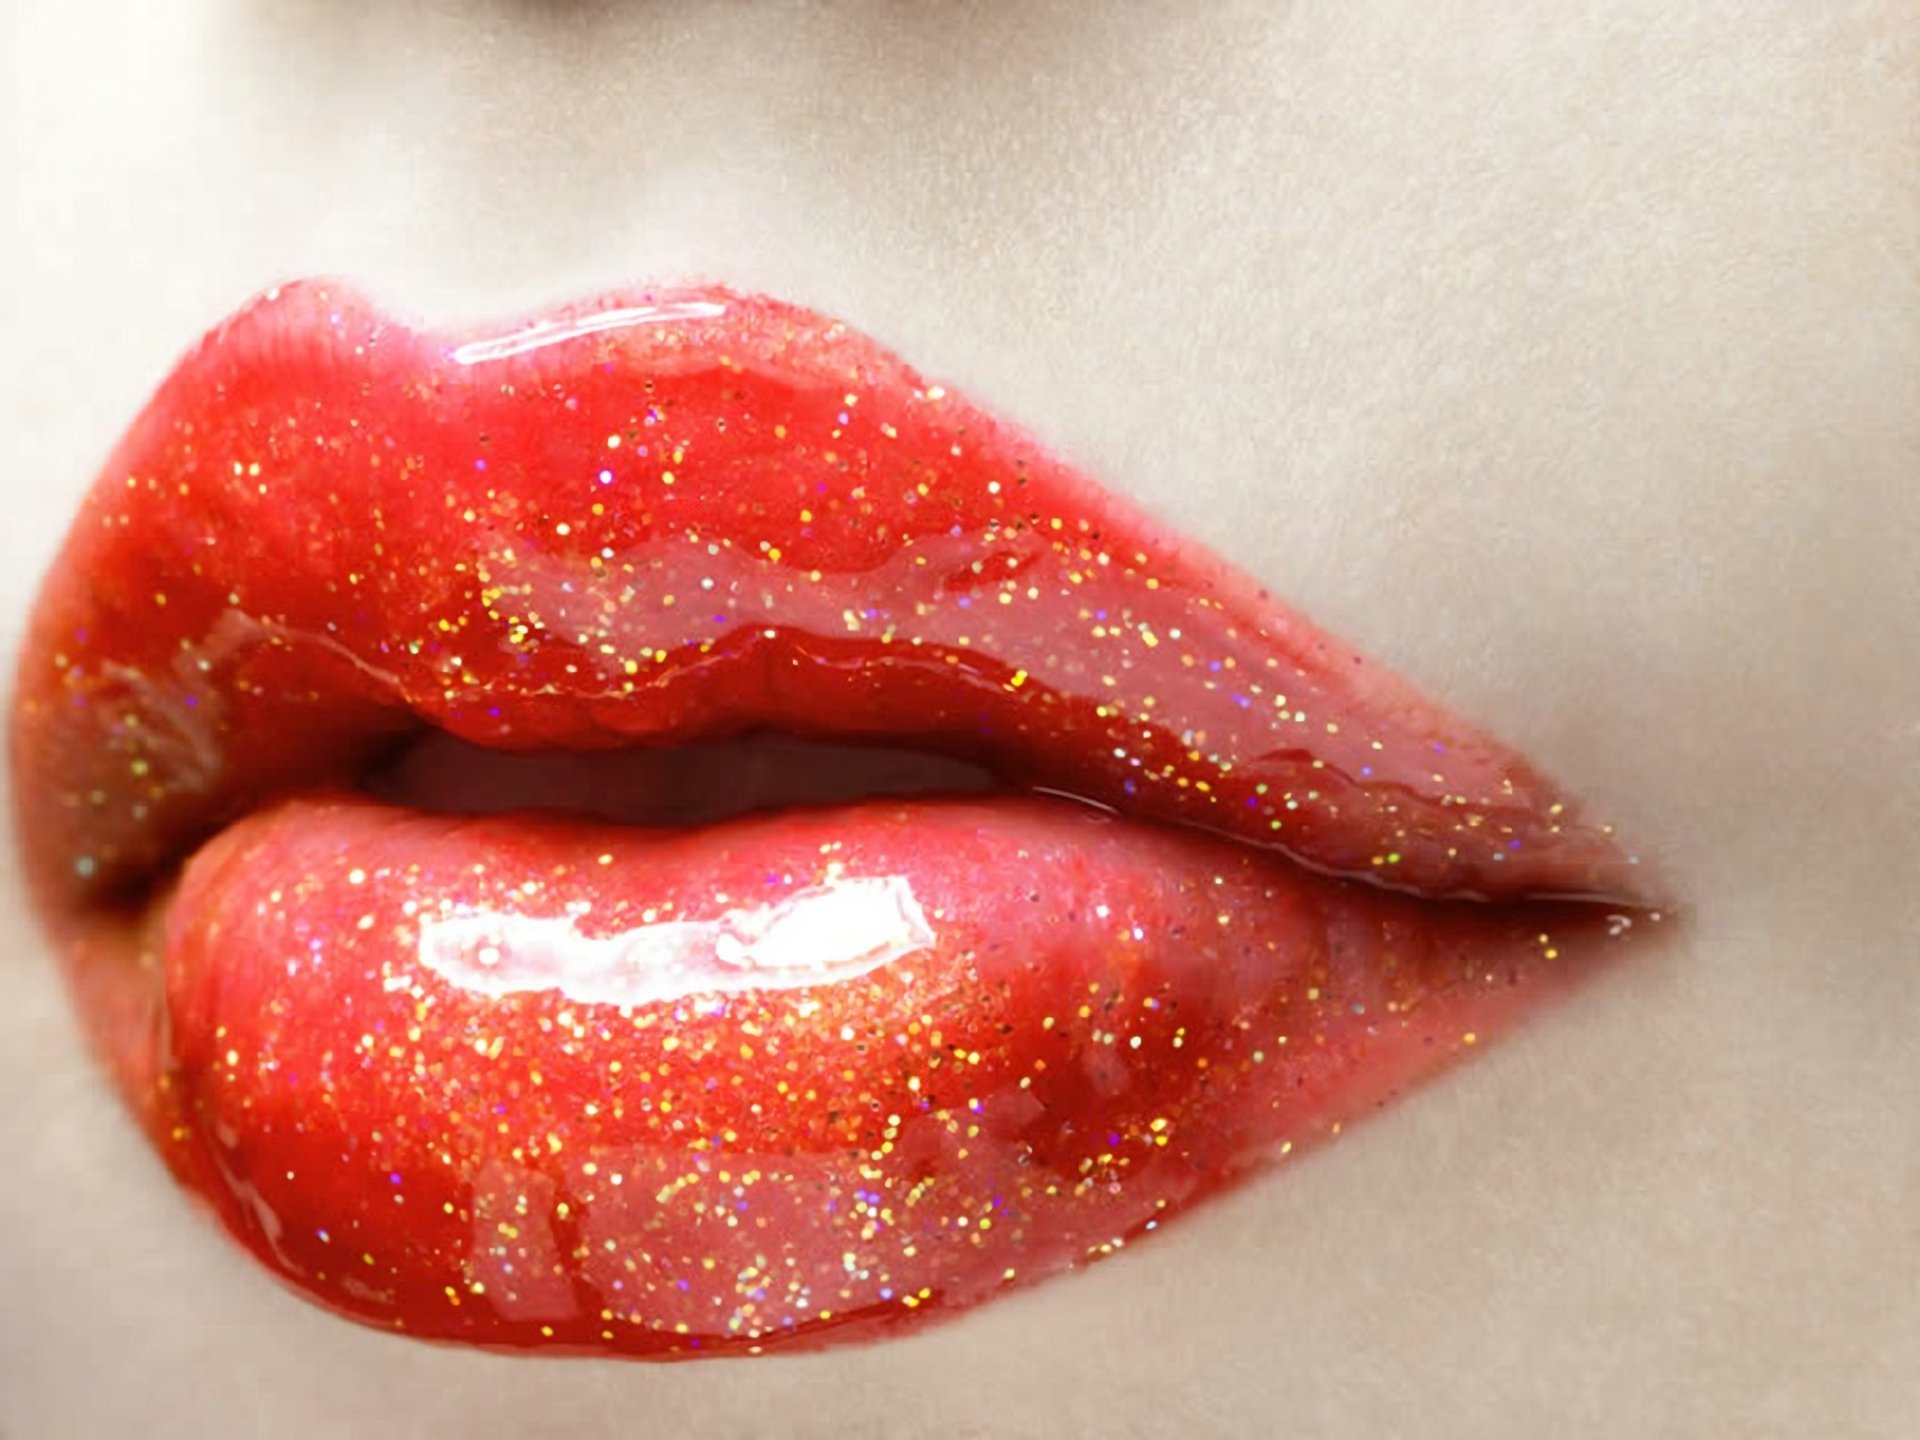 Artistic Lips HD Wallpaper Background Image